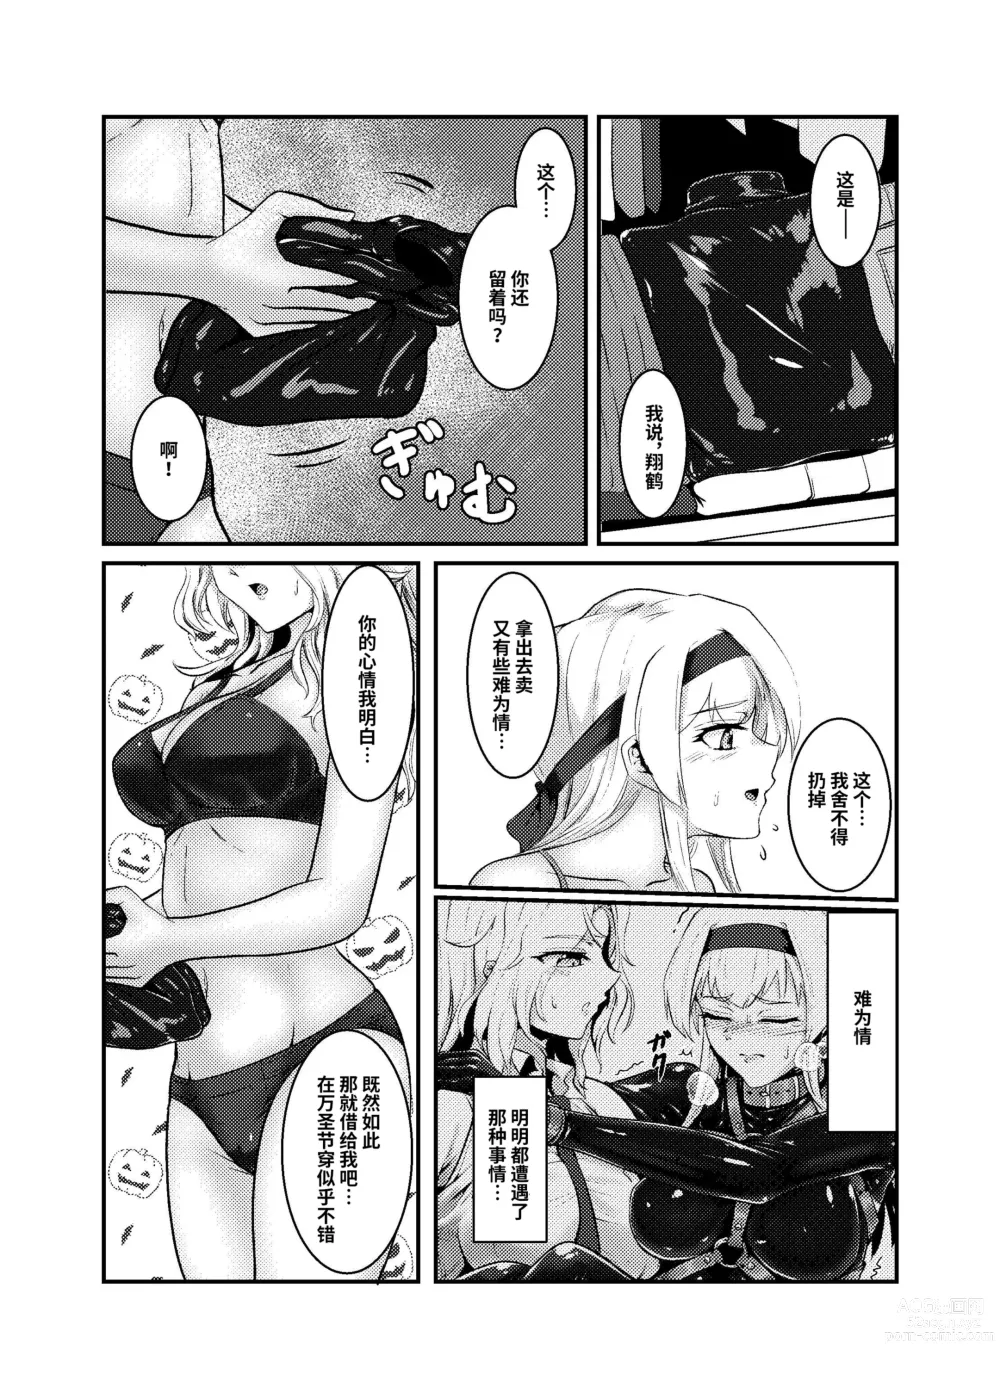 Page 6 of doujinshi Covered by Honey...